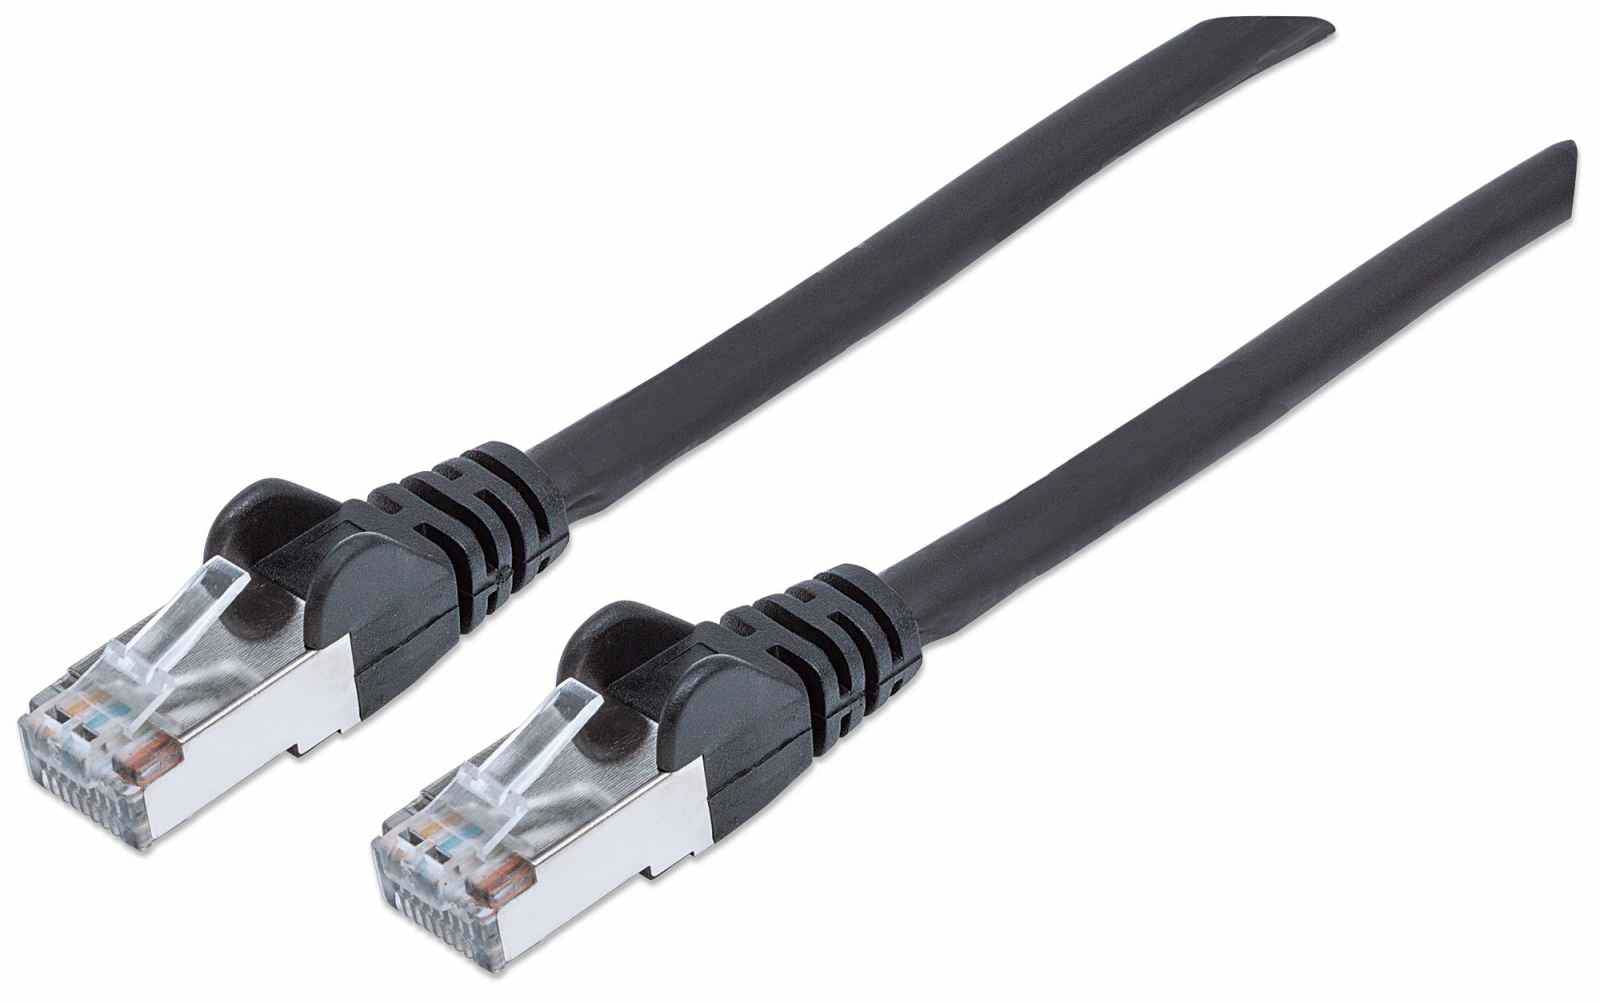 Intellinet Network Patch Cable, Cat7 Cable/Cat6A Plugs, 1m, Black, Copper, S/FTP, LSOH / LSZH, PVC, RJ45, Gold Plated Contacts, Snagless, Booted, Lifetime Warranty, Polybag